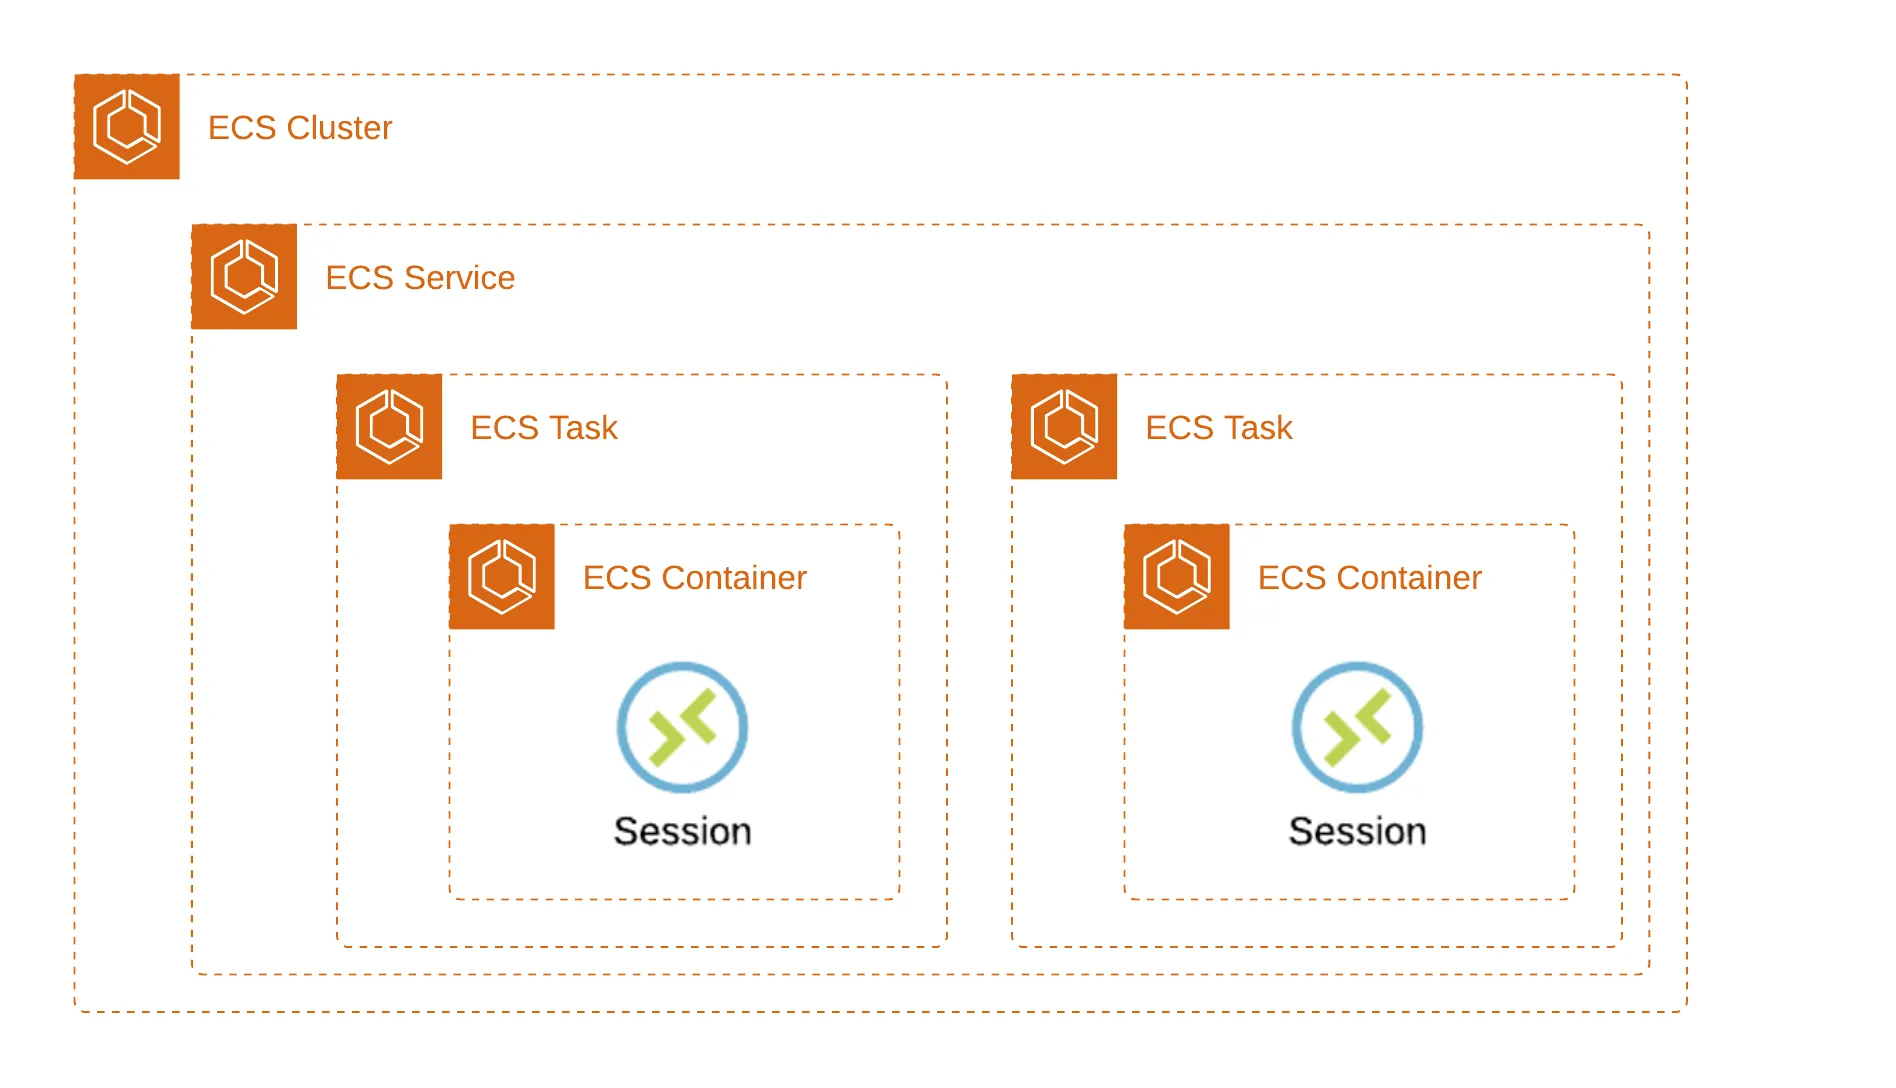 Scaling up of the ECS cluster